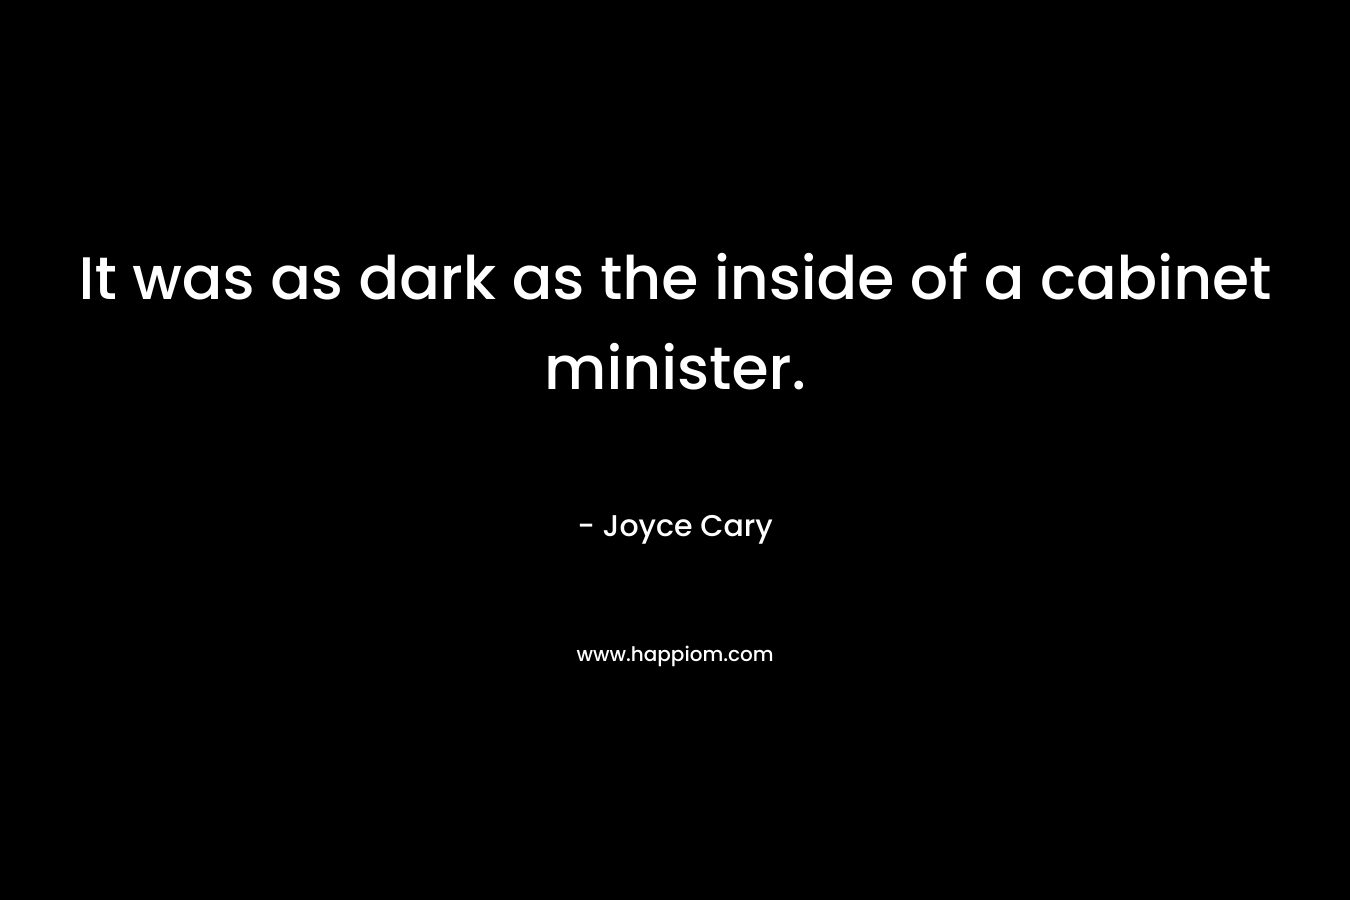 It was as dark as the inside of a cabinet minister.